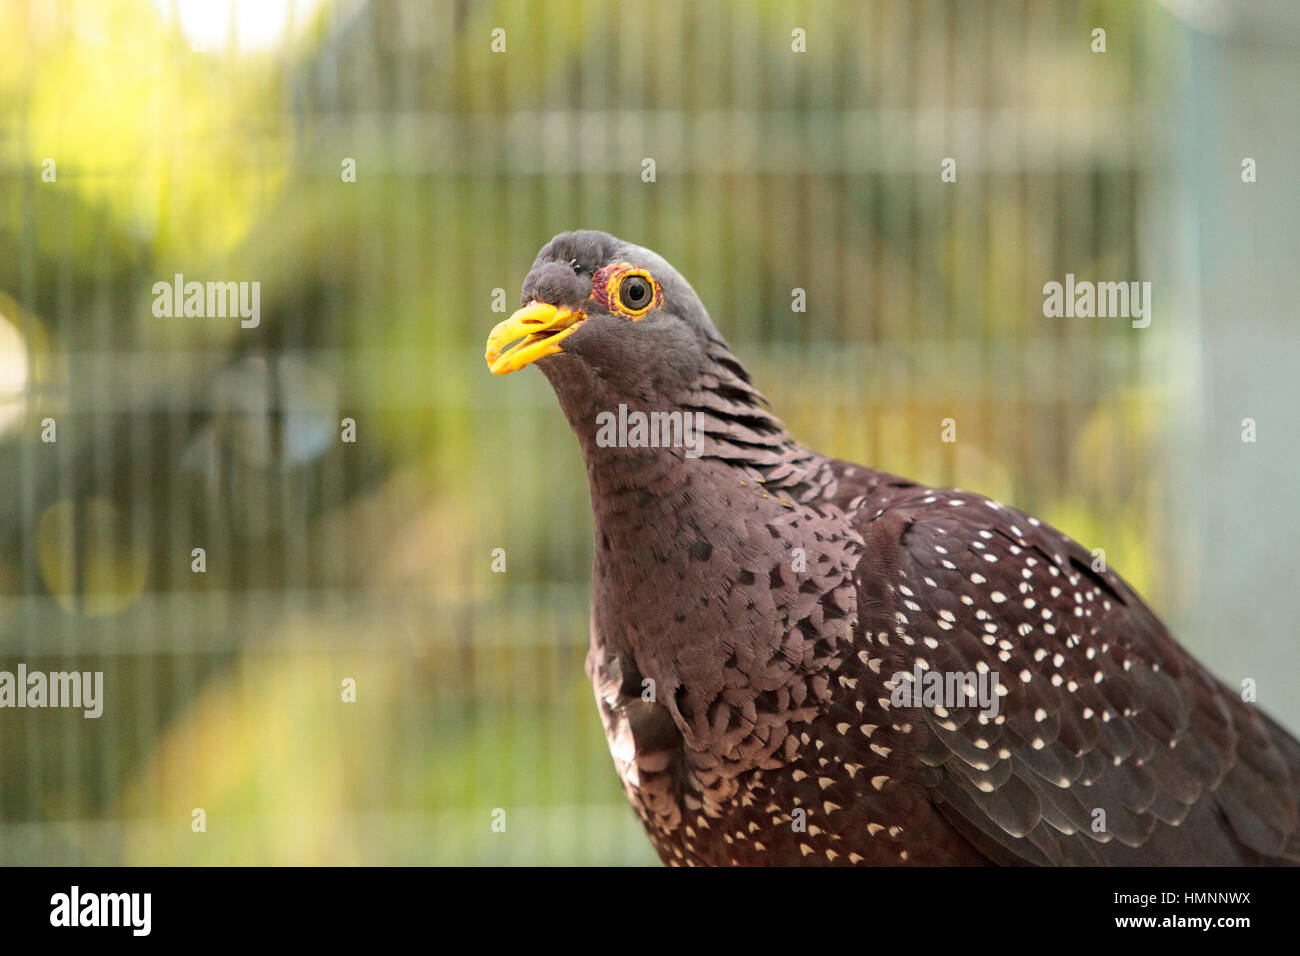 African olive pigeon known as Columba arquatrix perches on a branch. Stock Photo